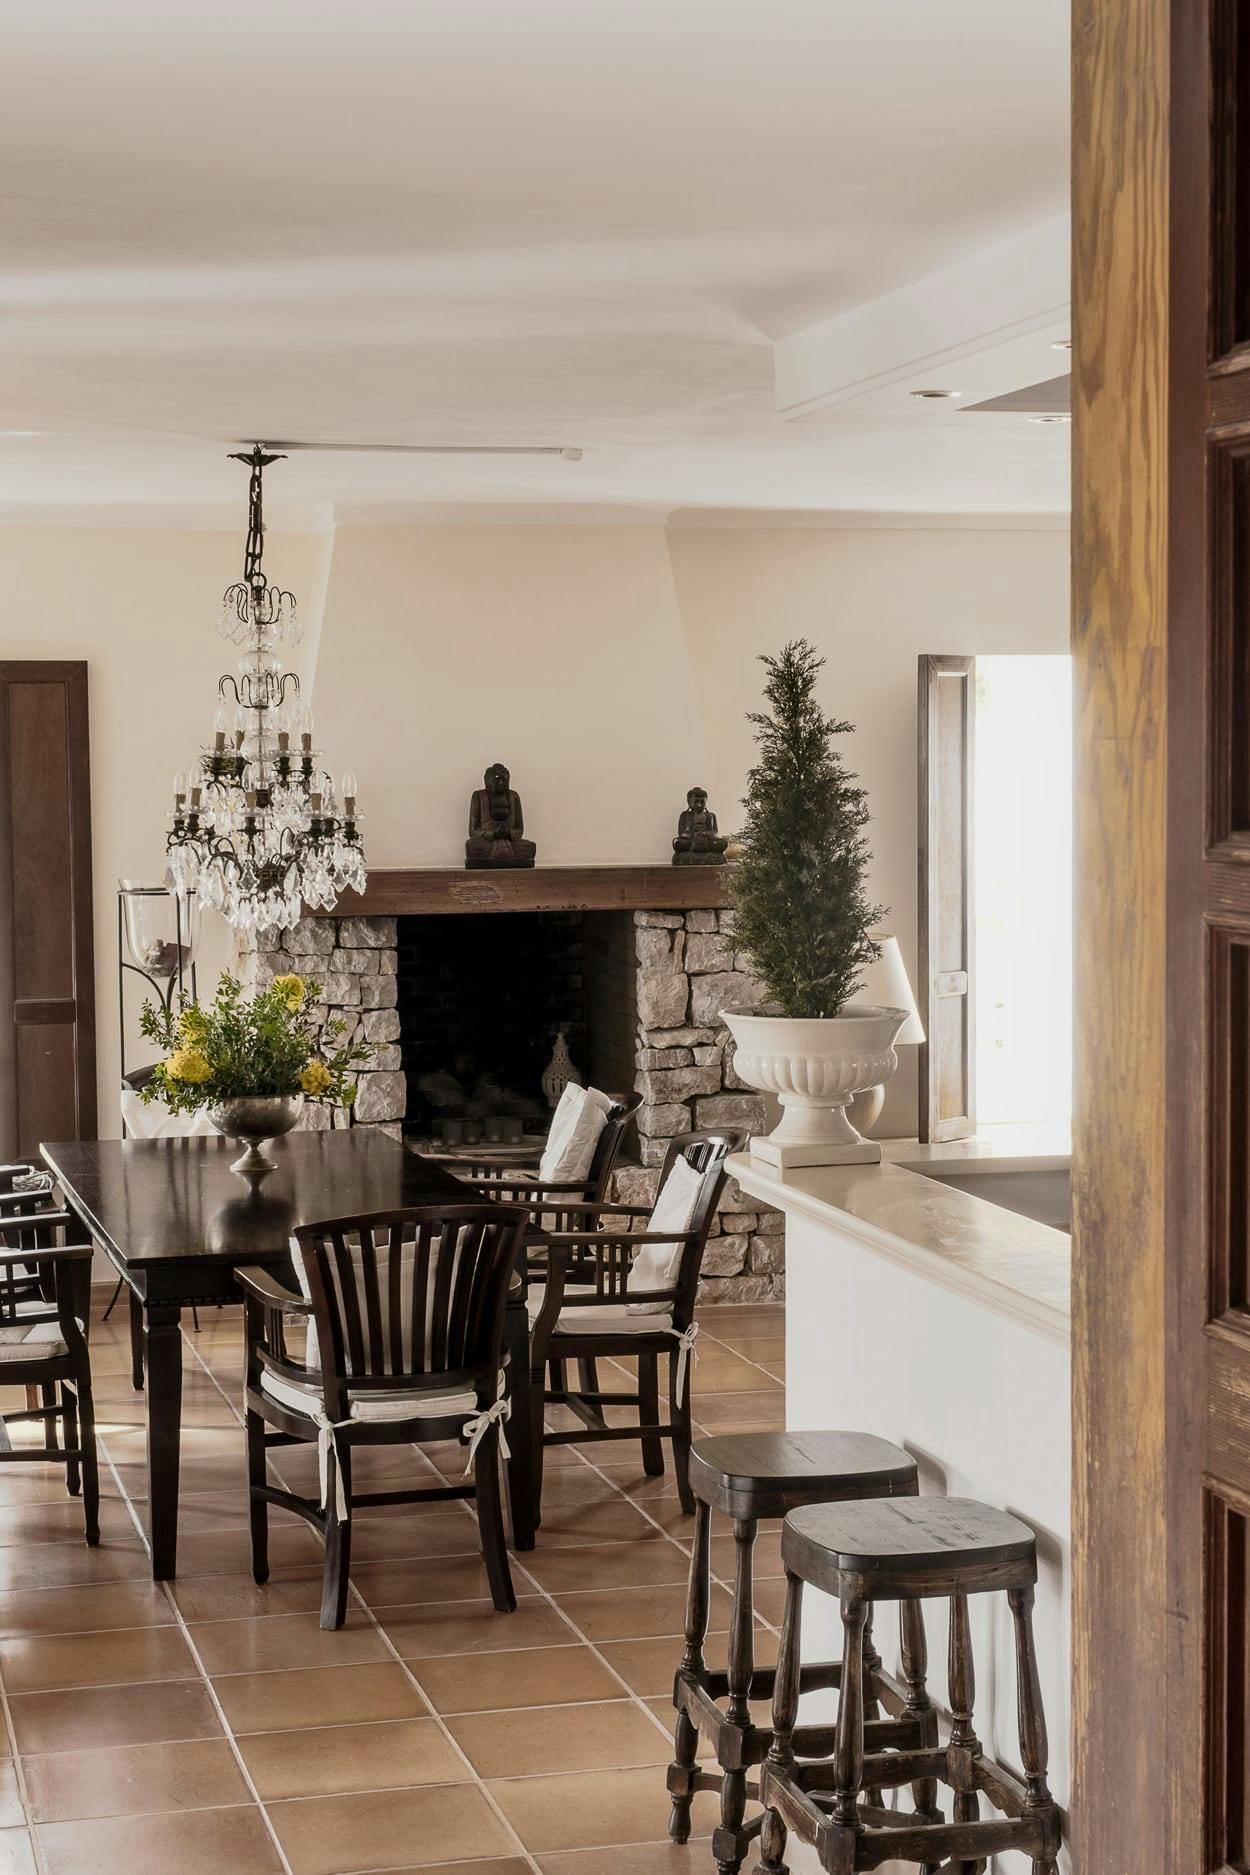 The image features a spacious living room with a fireplace, a dining table, and a chandelier.